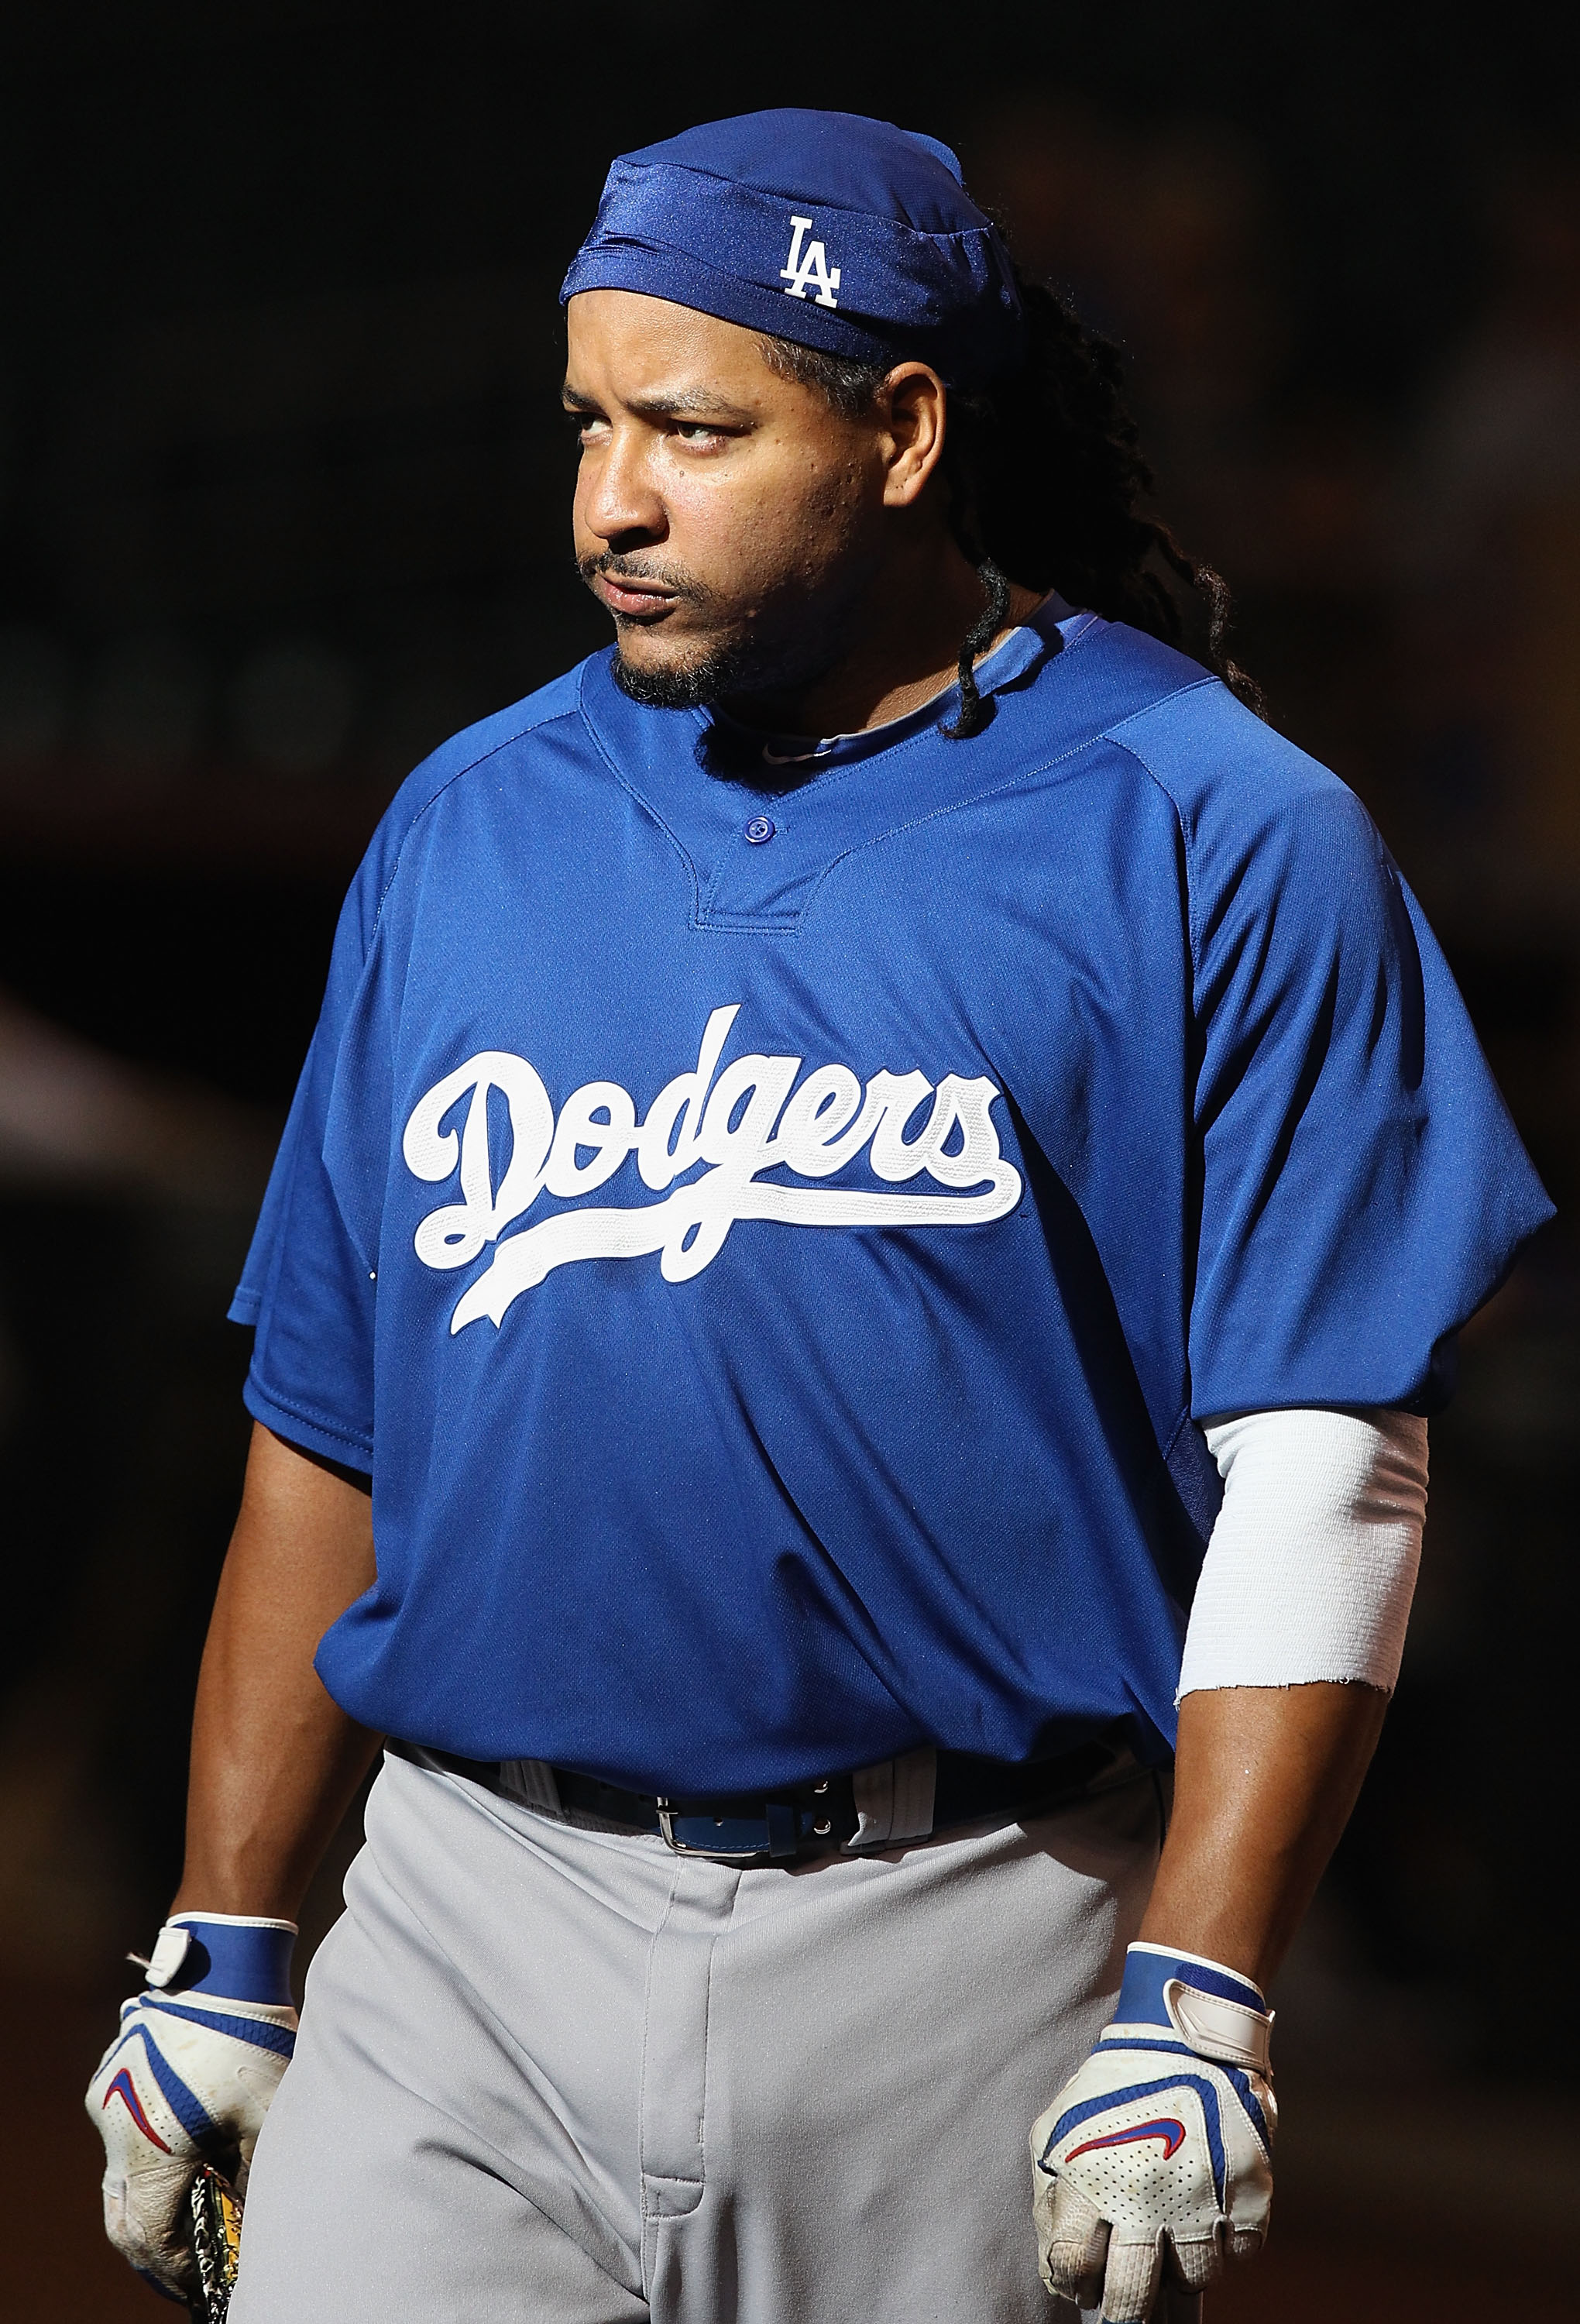 Manny Ramirez: Has the Former Star Reformed Since His Positive Drug Test?, News, Scores, Highlights, Stats, and Rumors